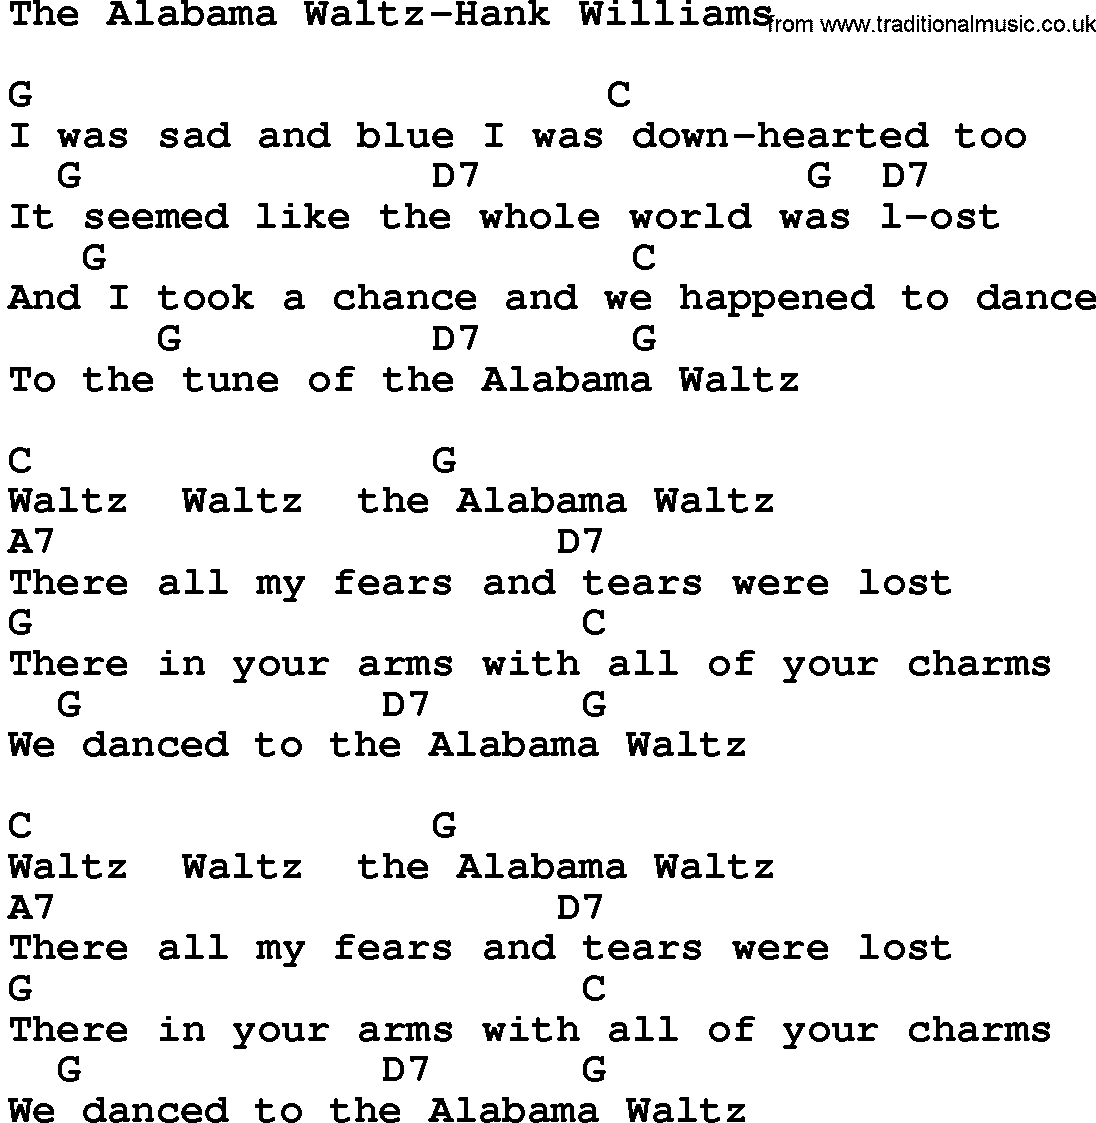 Country music song: The Alabama Waltz-Hank Williams lyrics and chords